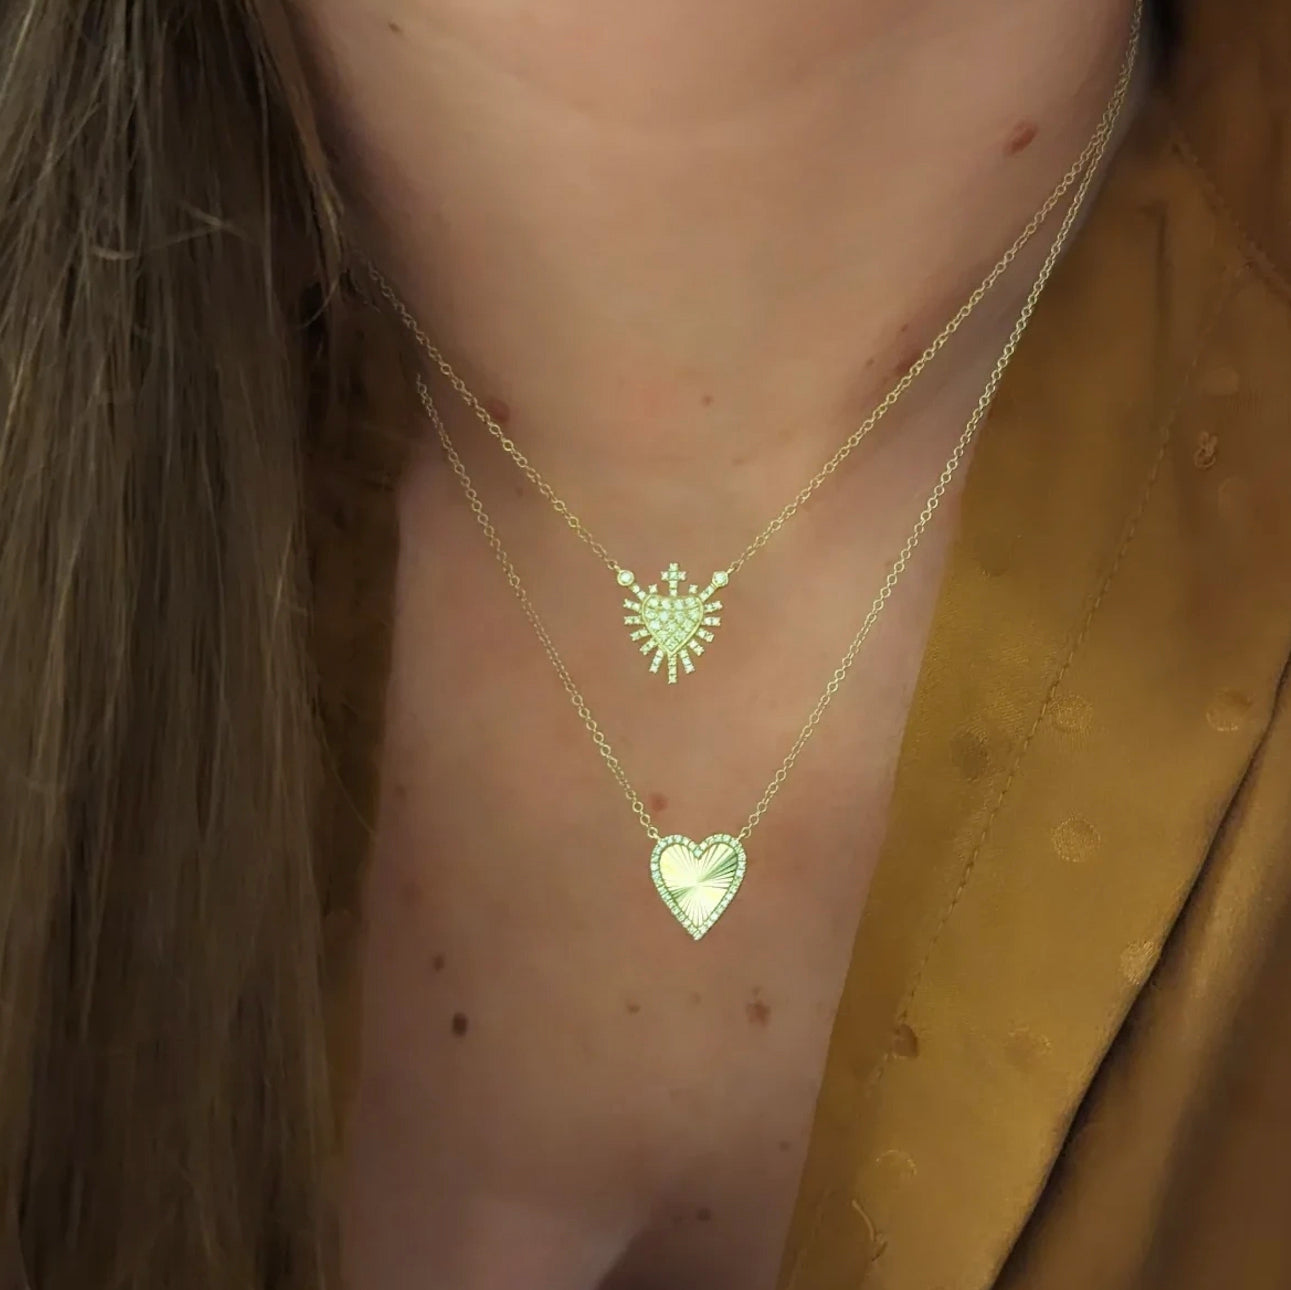 fluted heart necklace in 14k with diamonds